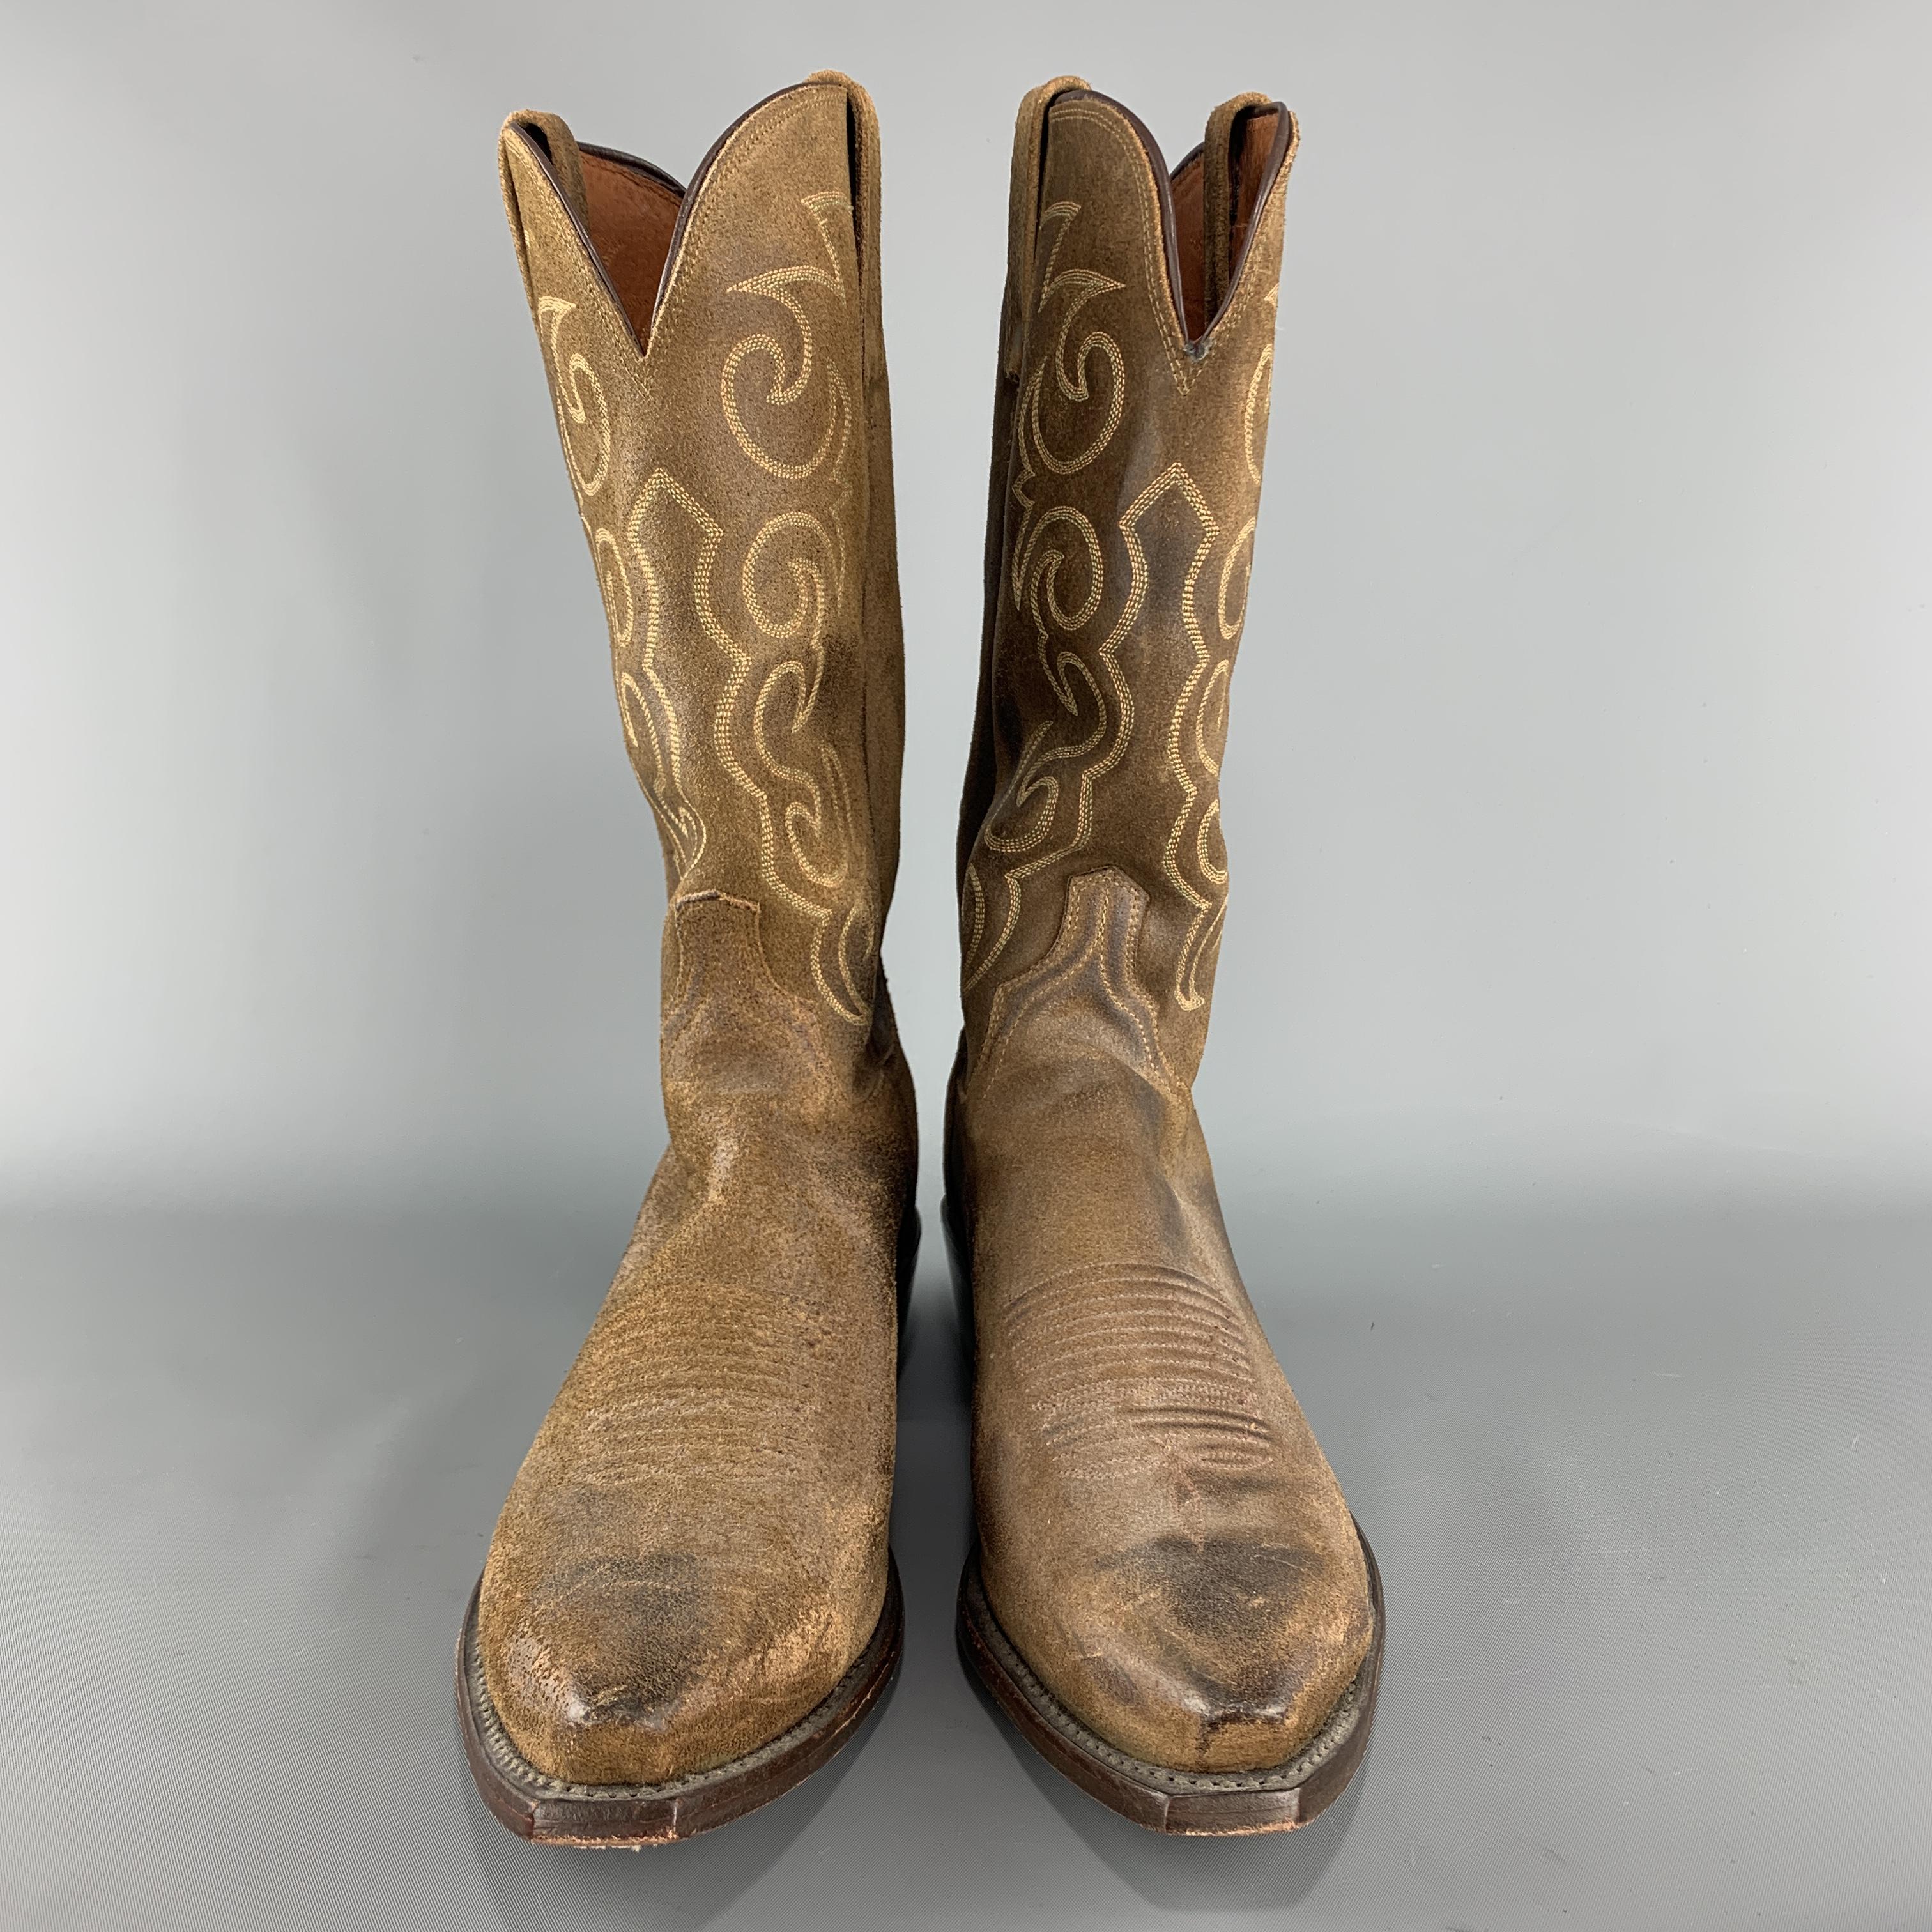 1883 by LUCCHESE cownbow boots come in tan suede with a pointed toe and embroidery.  Made in USA.

Good Pre-Owned Condition.
Marked: US 10.5

Outsole: 12.5 x 4 in.
Length: 13 in.